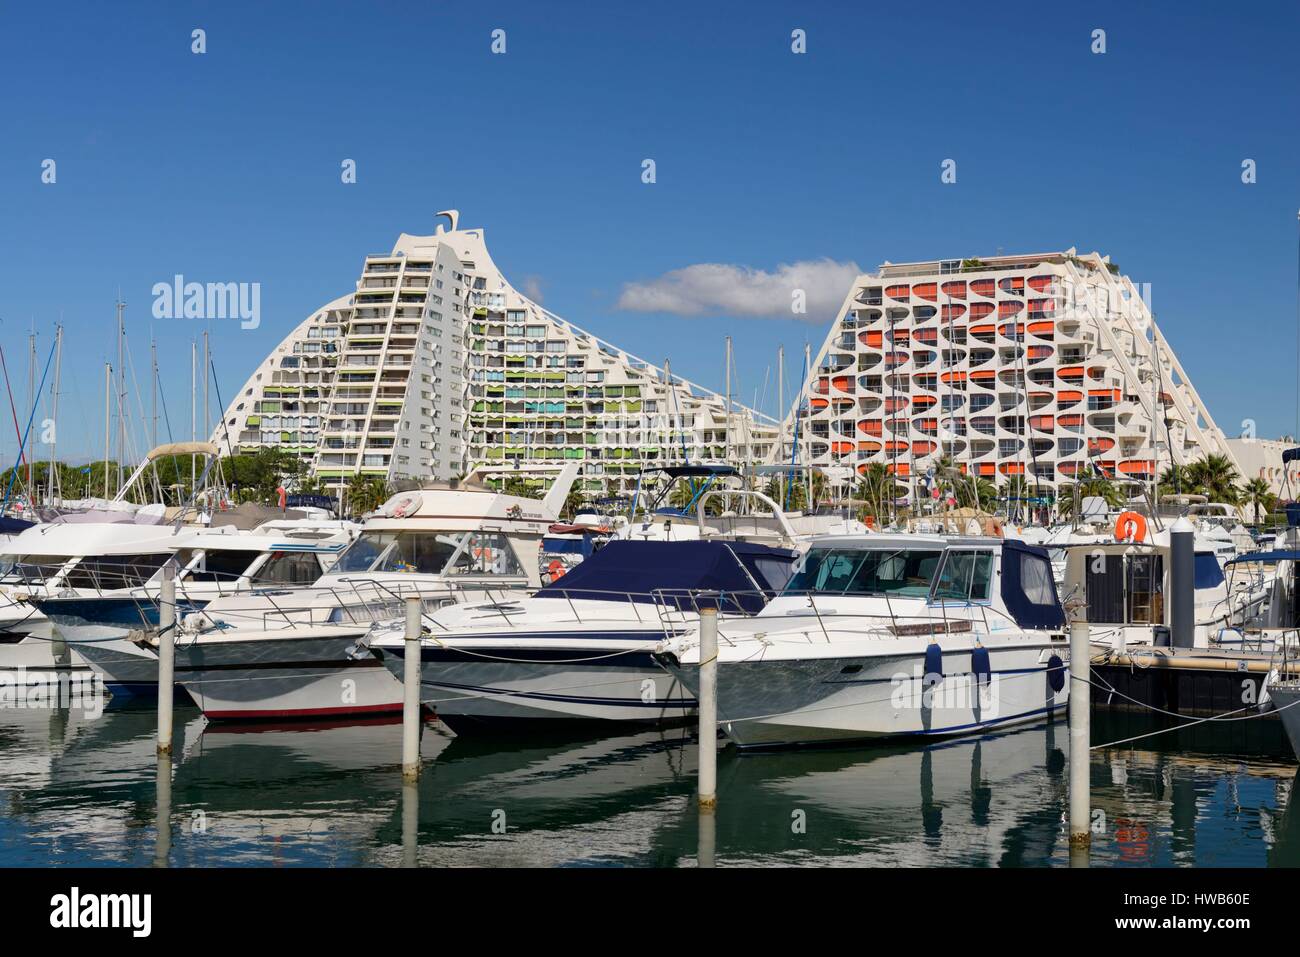 France, Herault, La Grande Motte, Building the Great Pyramid built in 1974 and residence Eden seen from the Marina Port Stock Photo